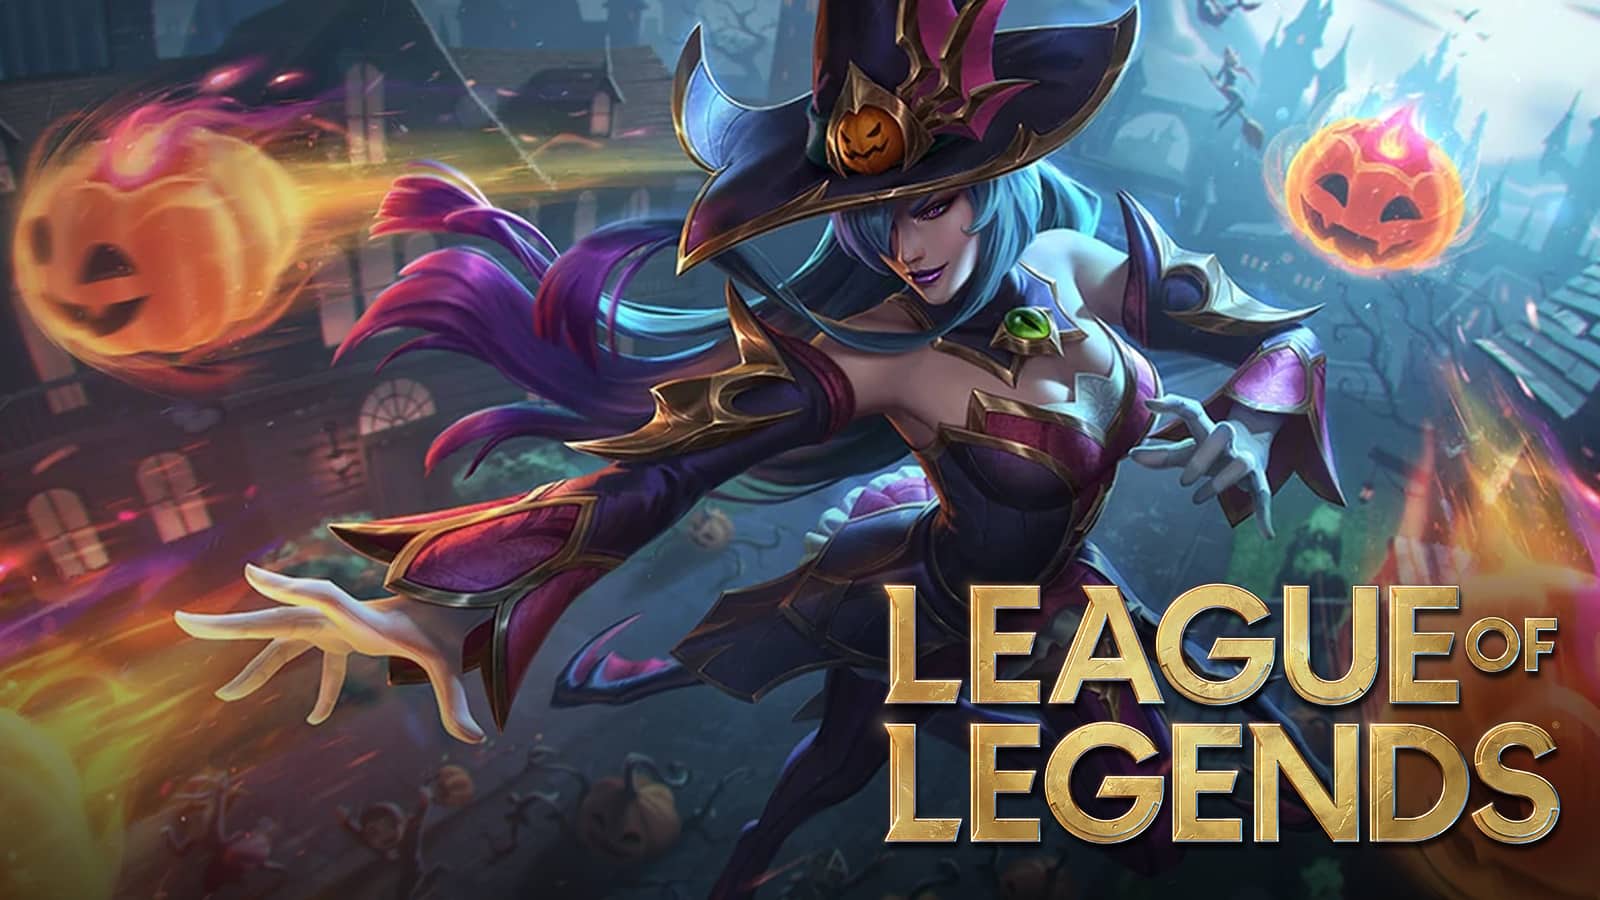 Syndra casts a Halloween Dark Sphere over the League of Legends logo.